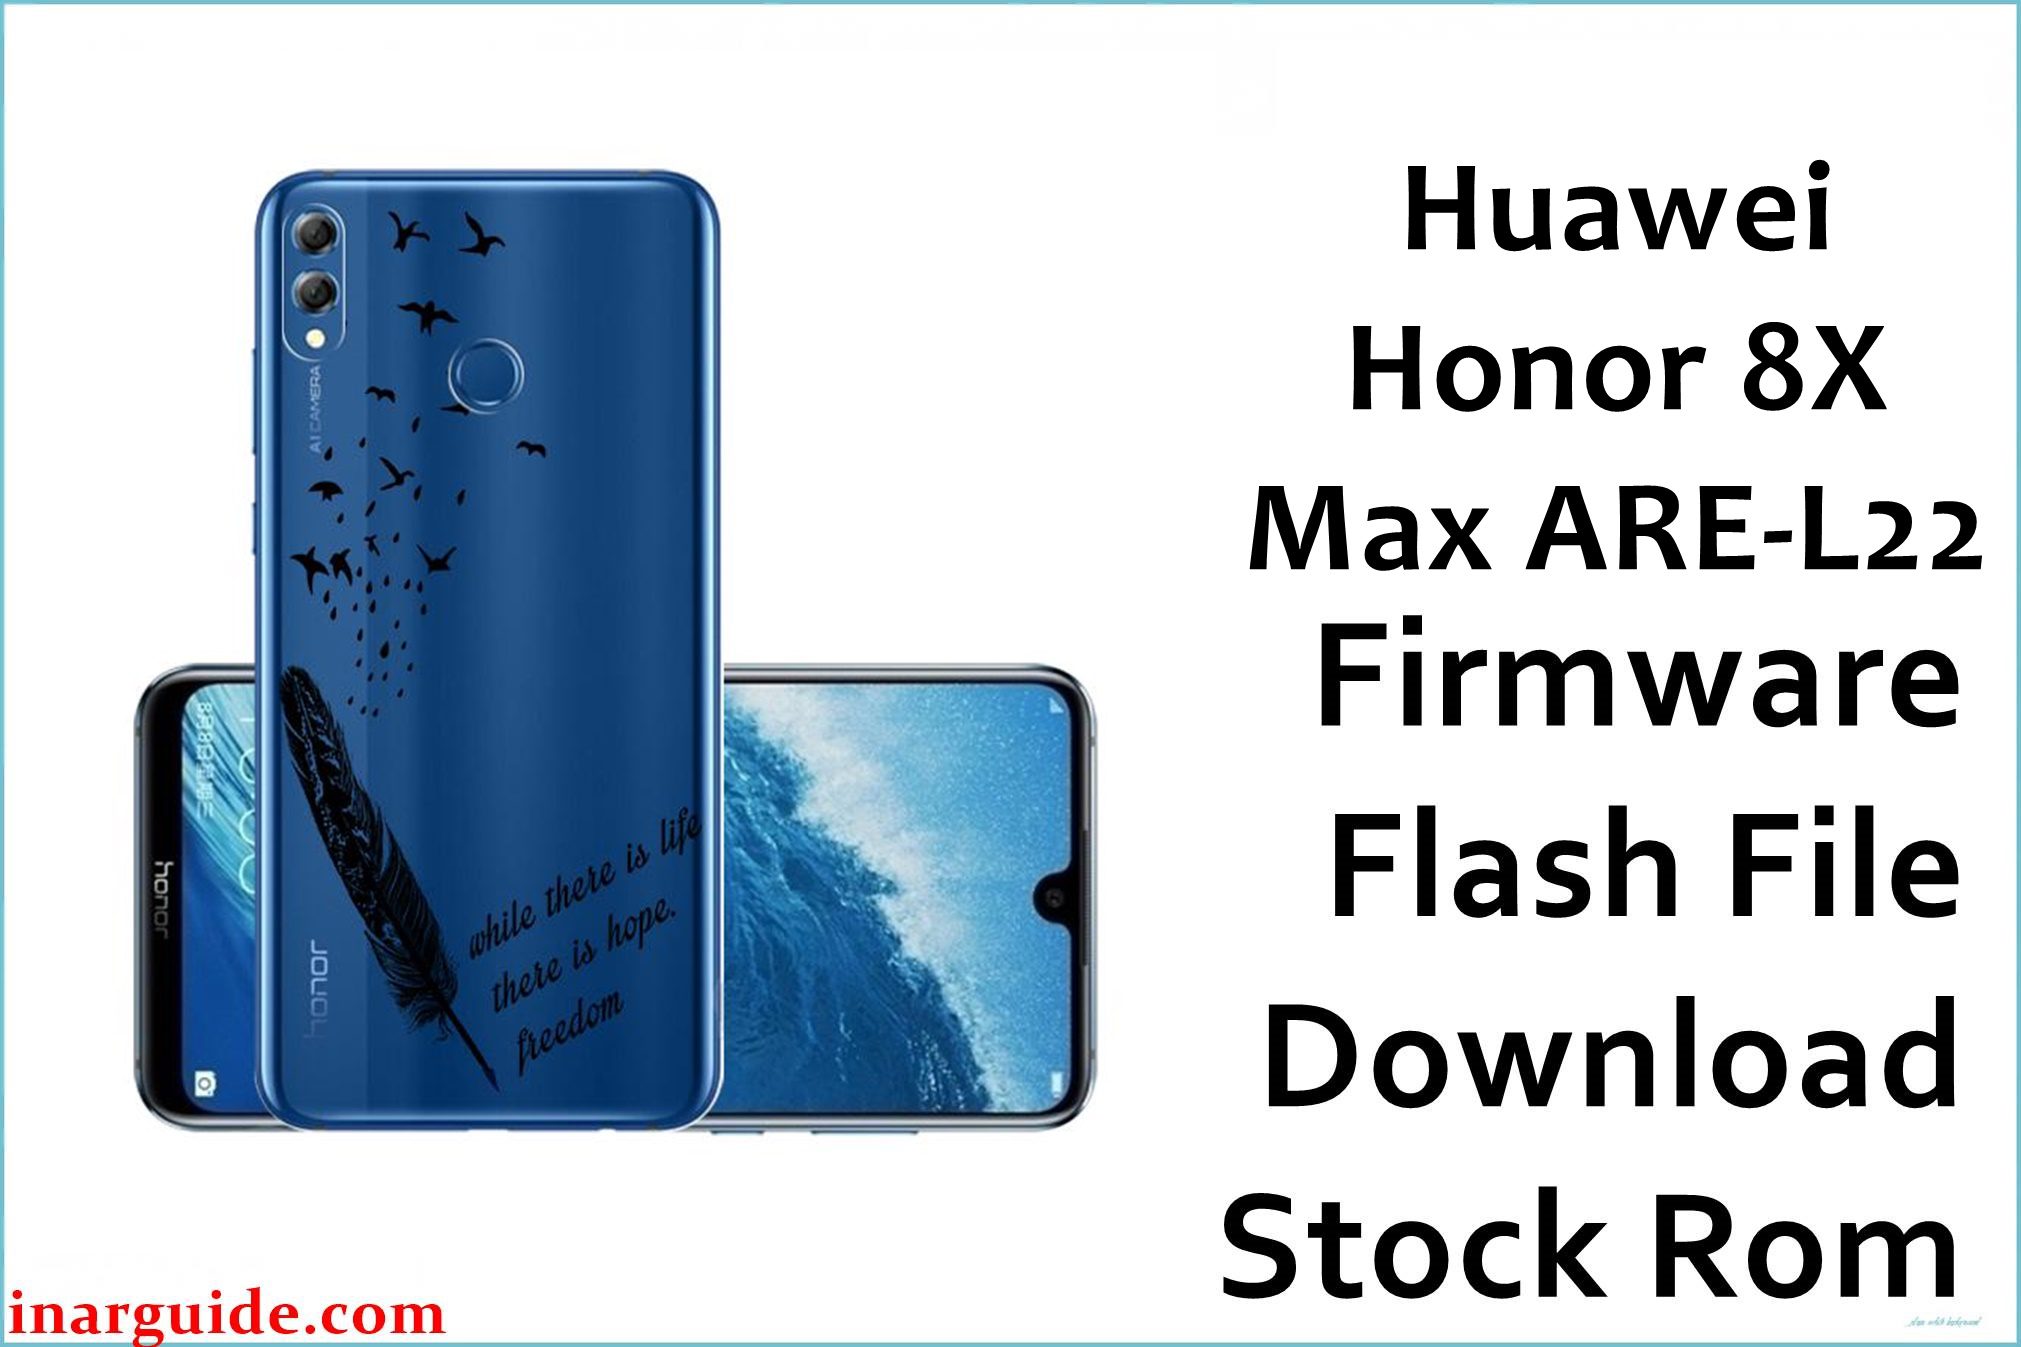 Huawei Honor 8X Max ARE L22